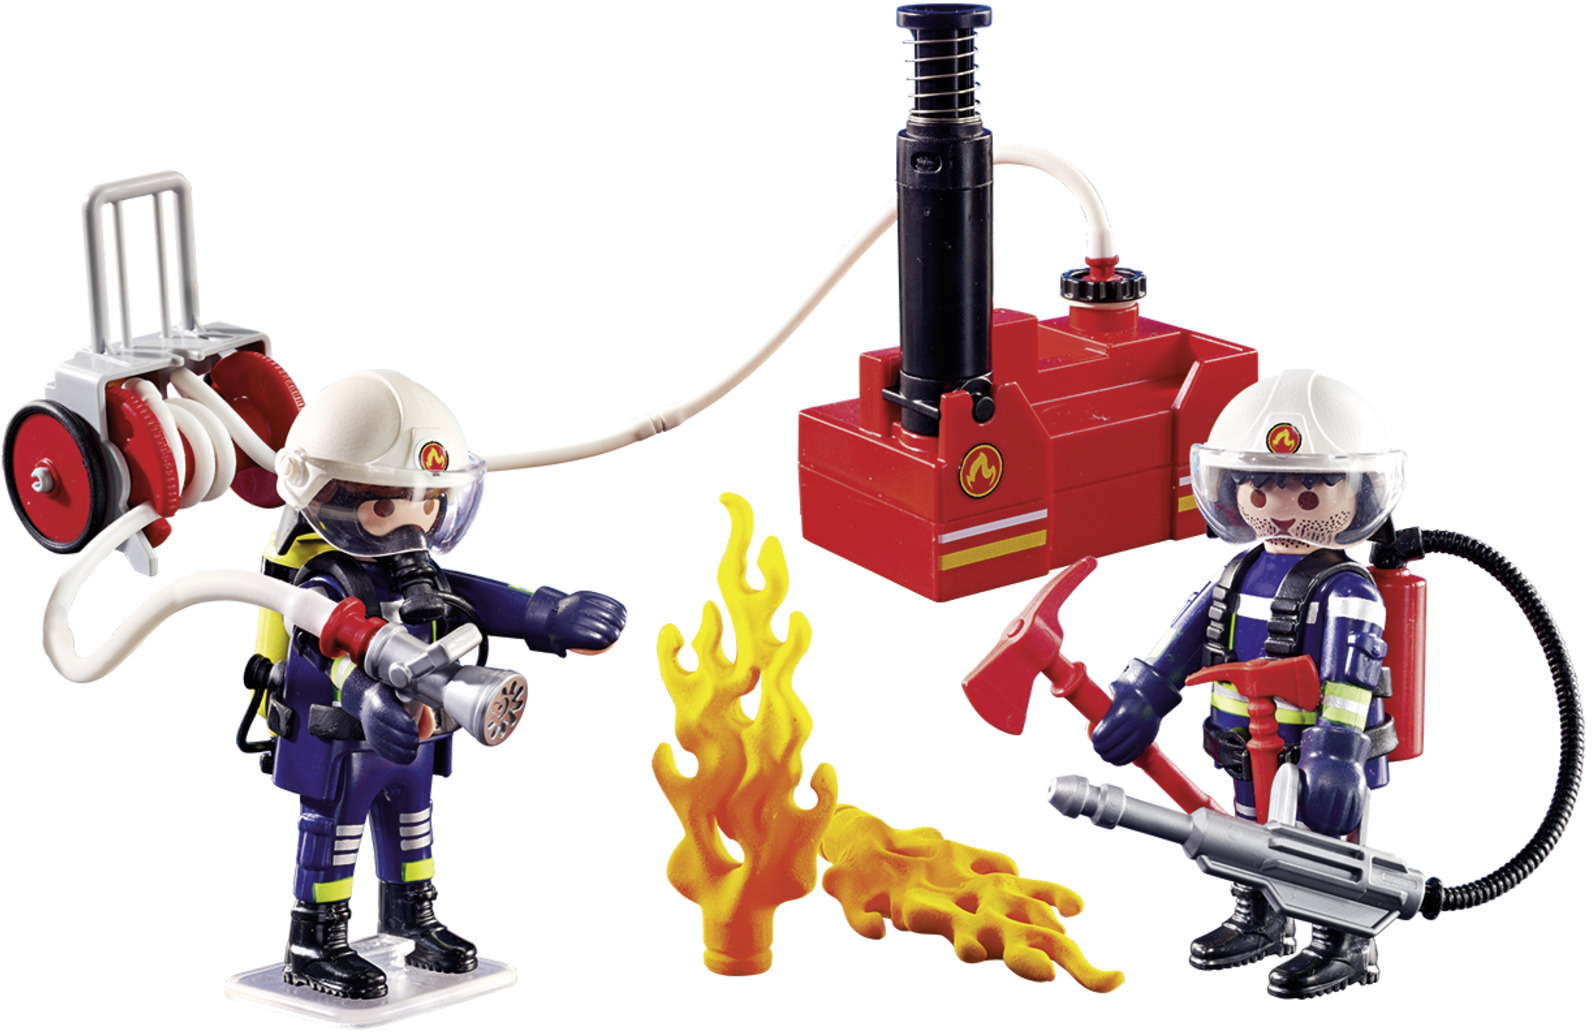 PLAYMOBIL Firefighters with Water Pump - image 1 of 5